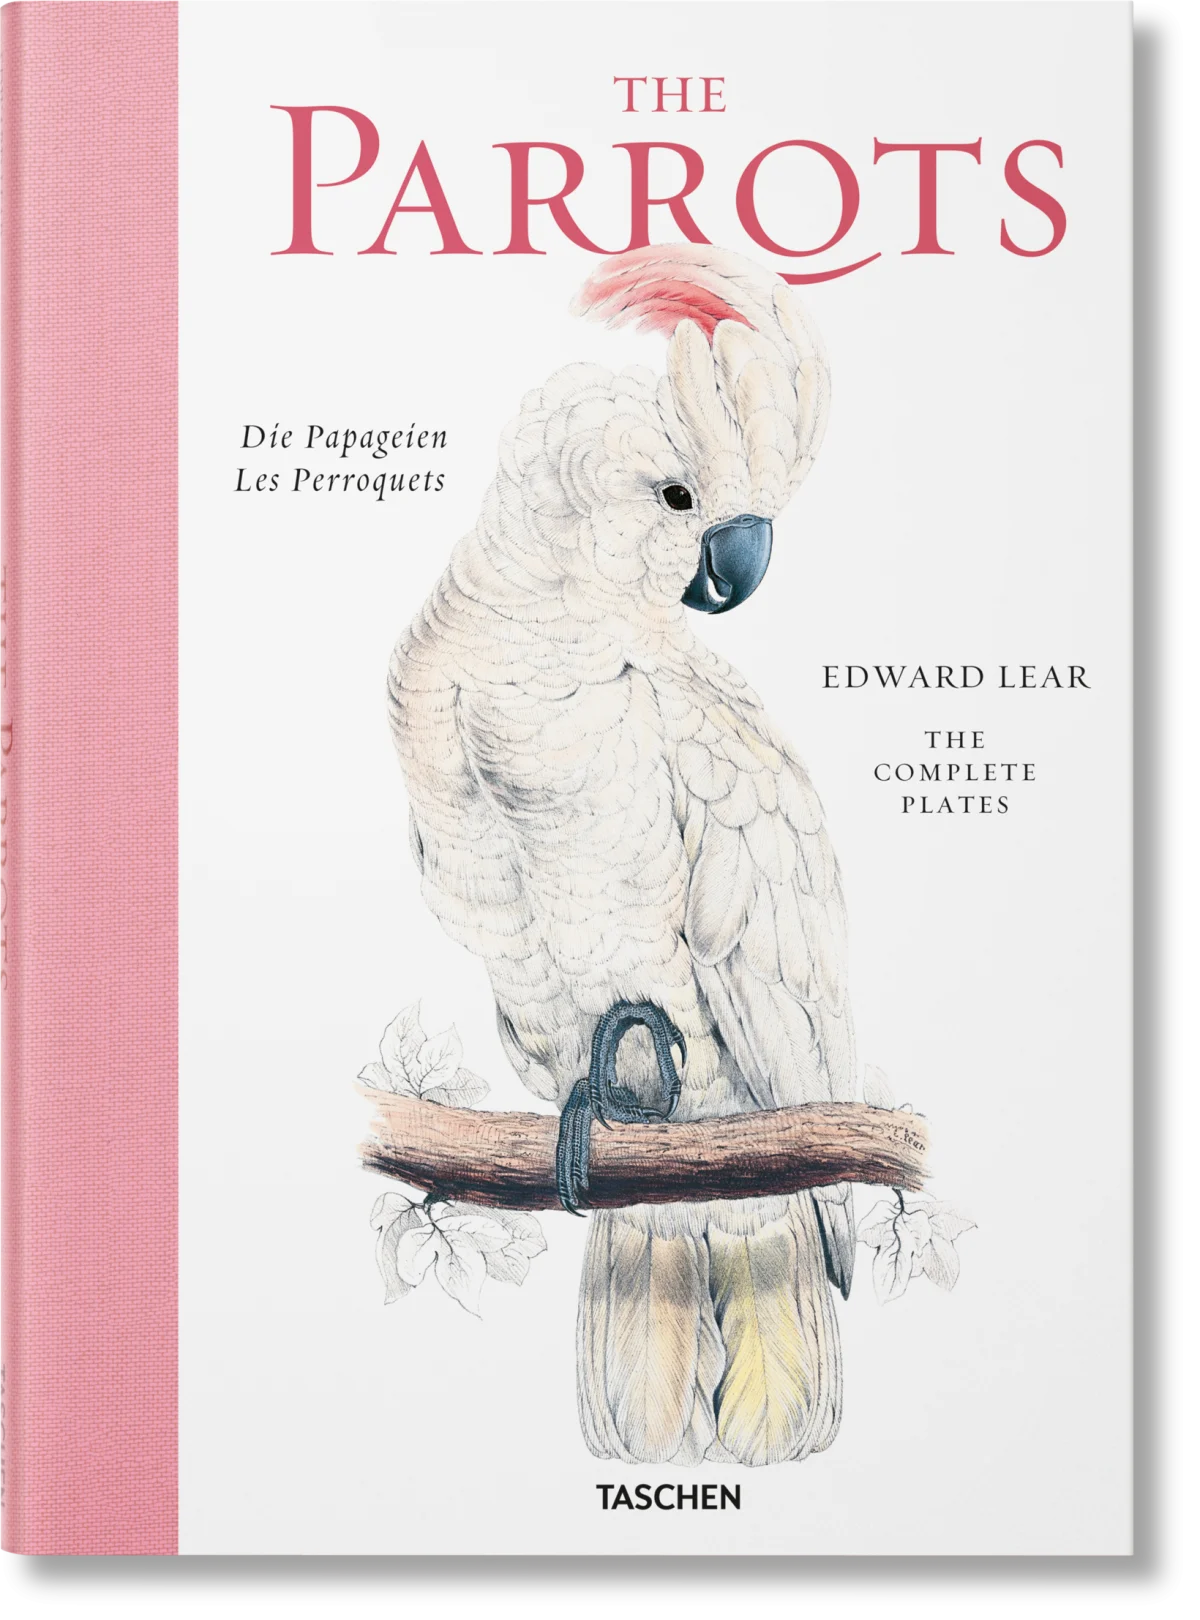 Edward Lear. Les Perroquets. The Complete Plates